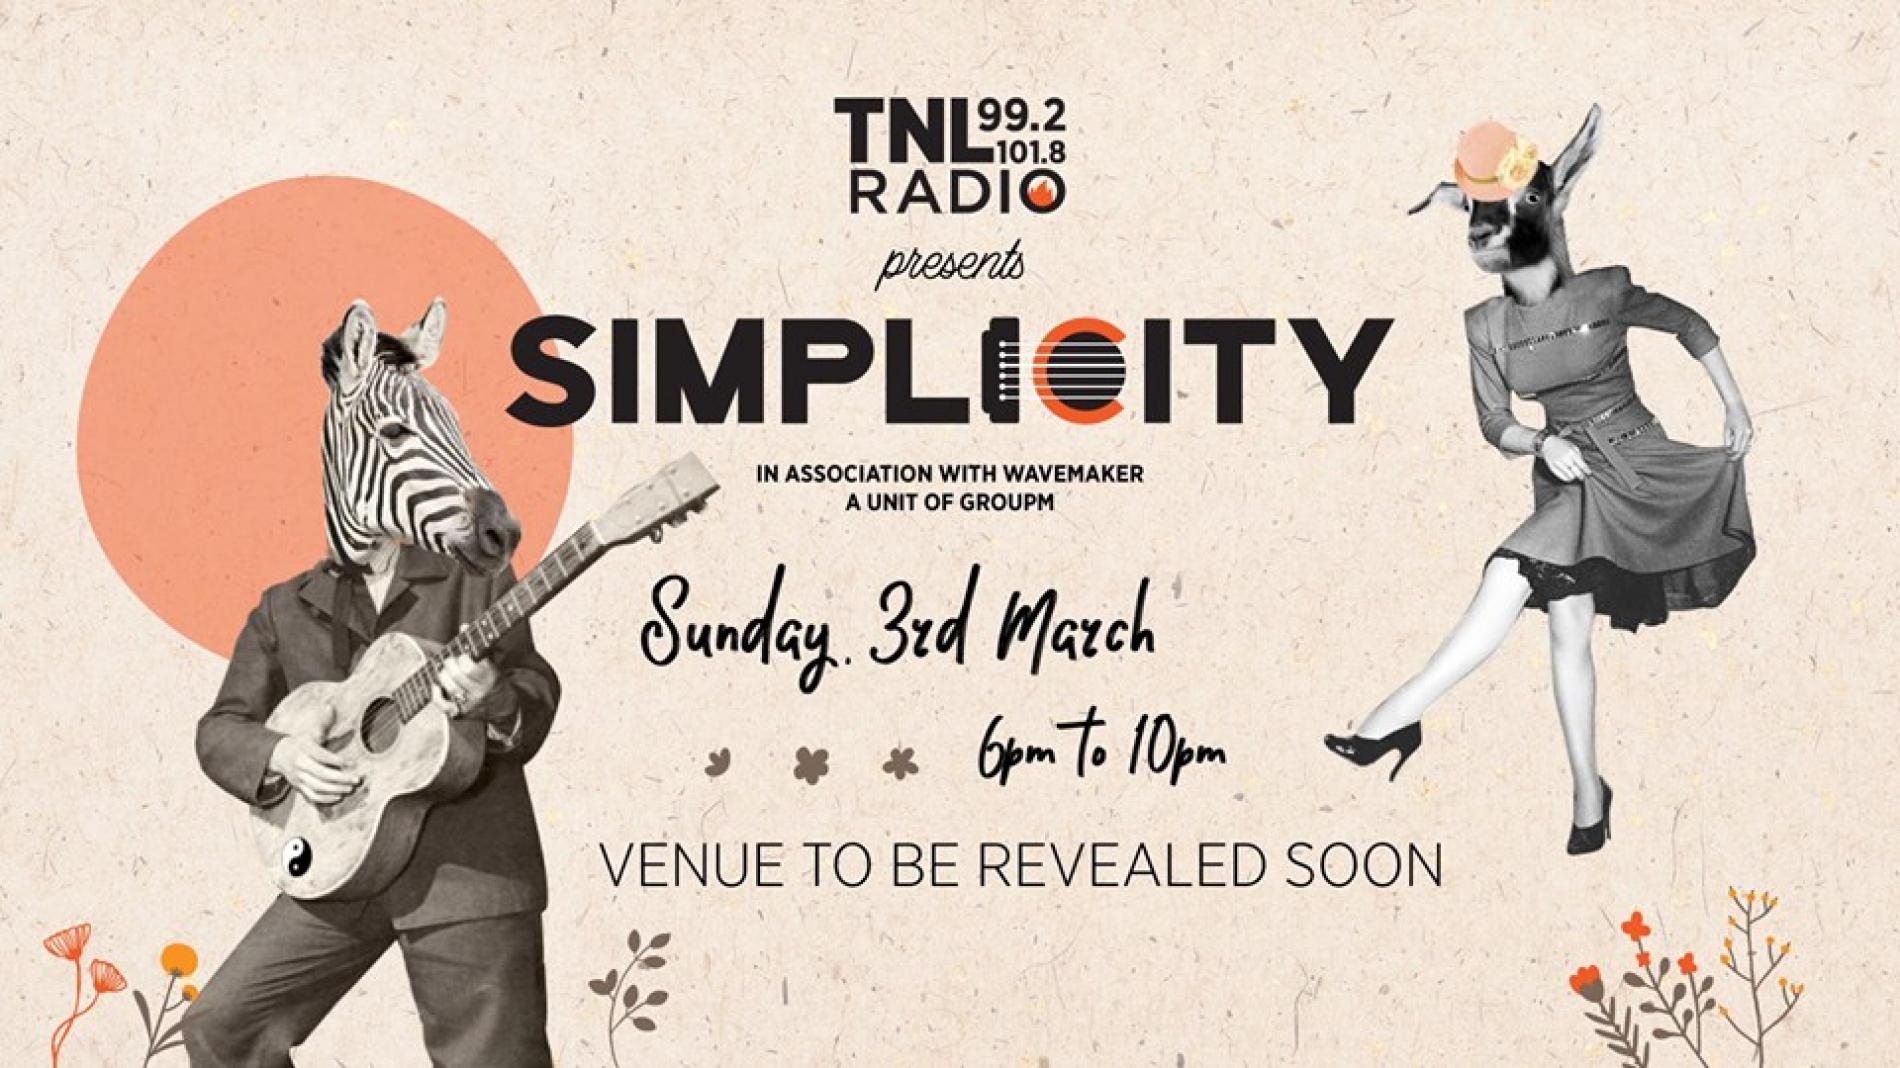 TNL Radio Presents Simplicity – In Association With Wavemaker